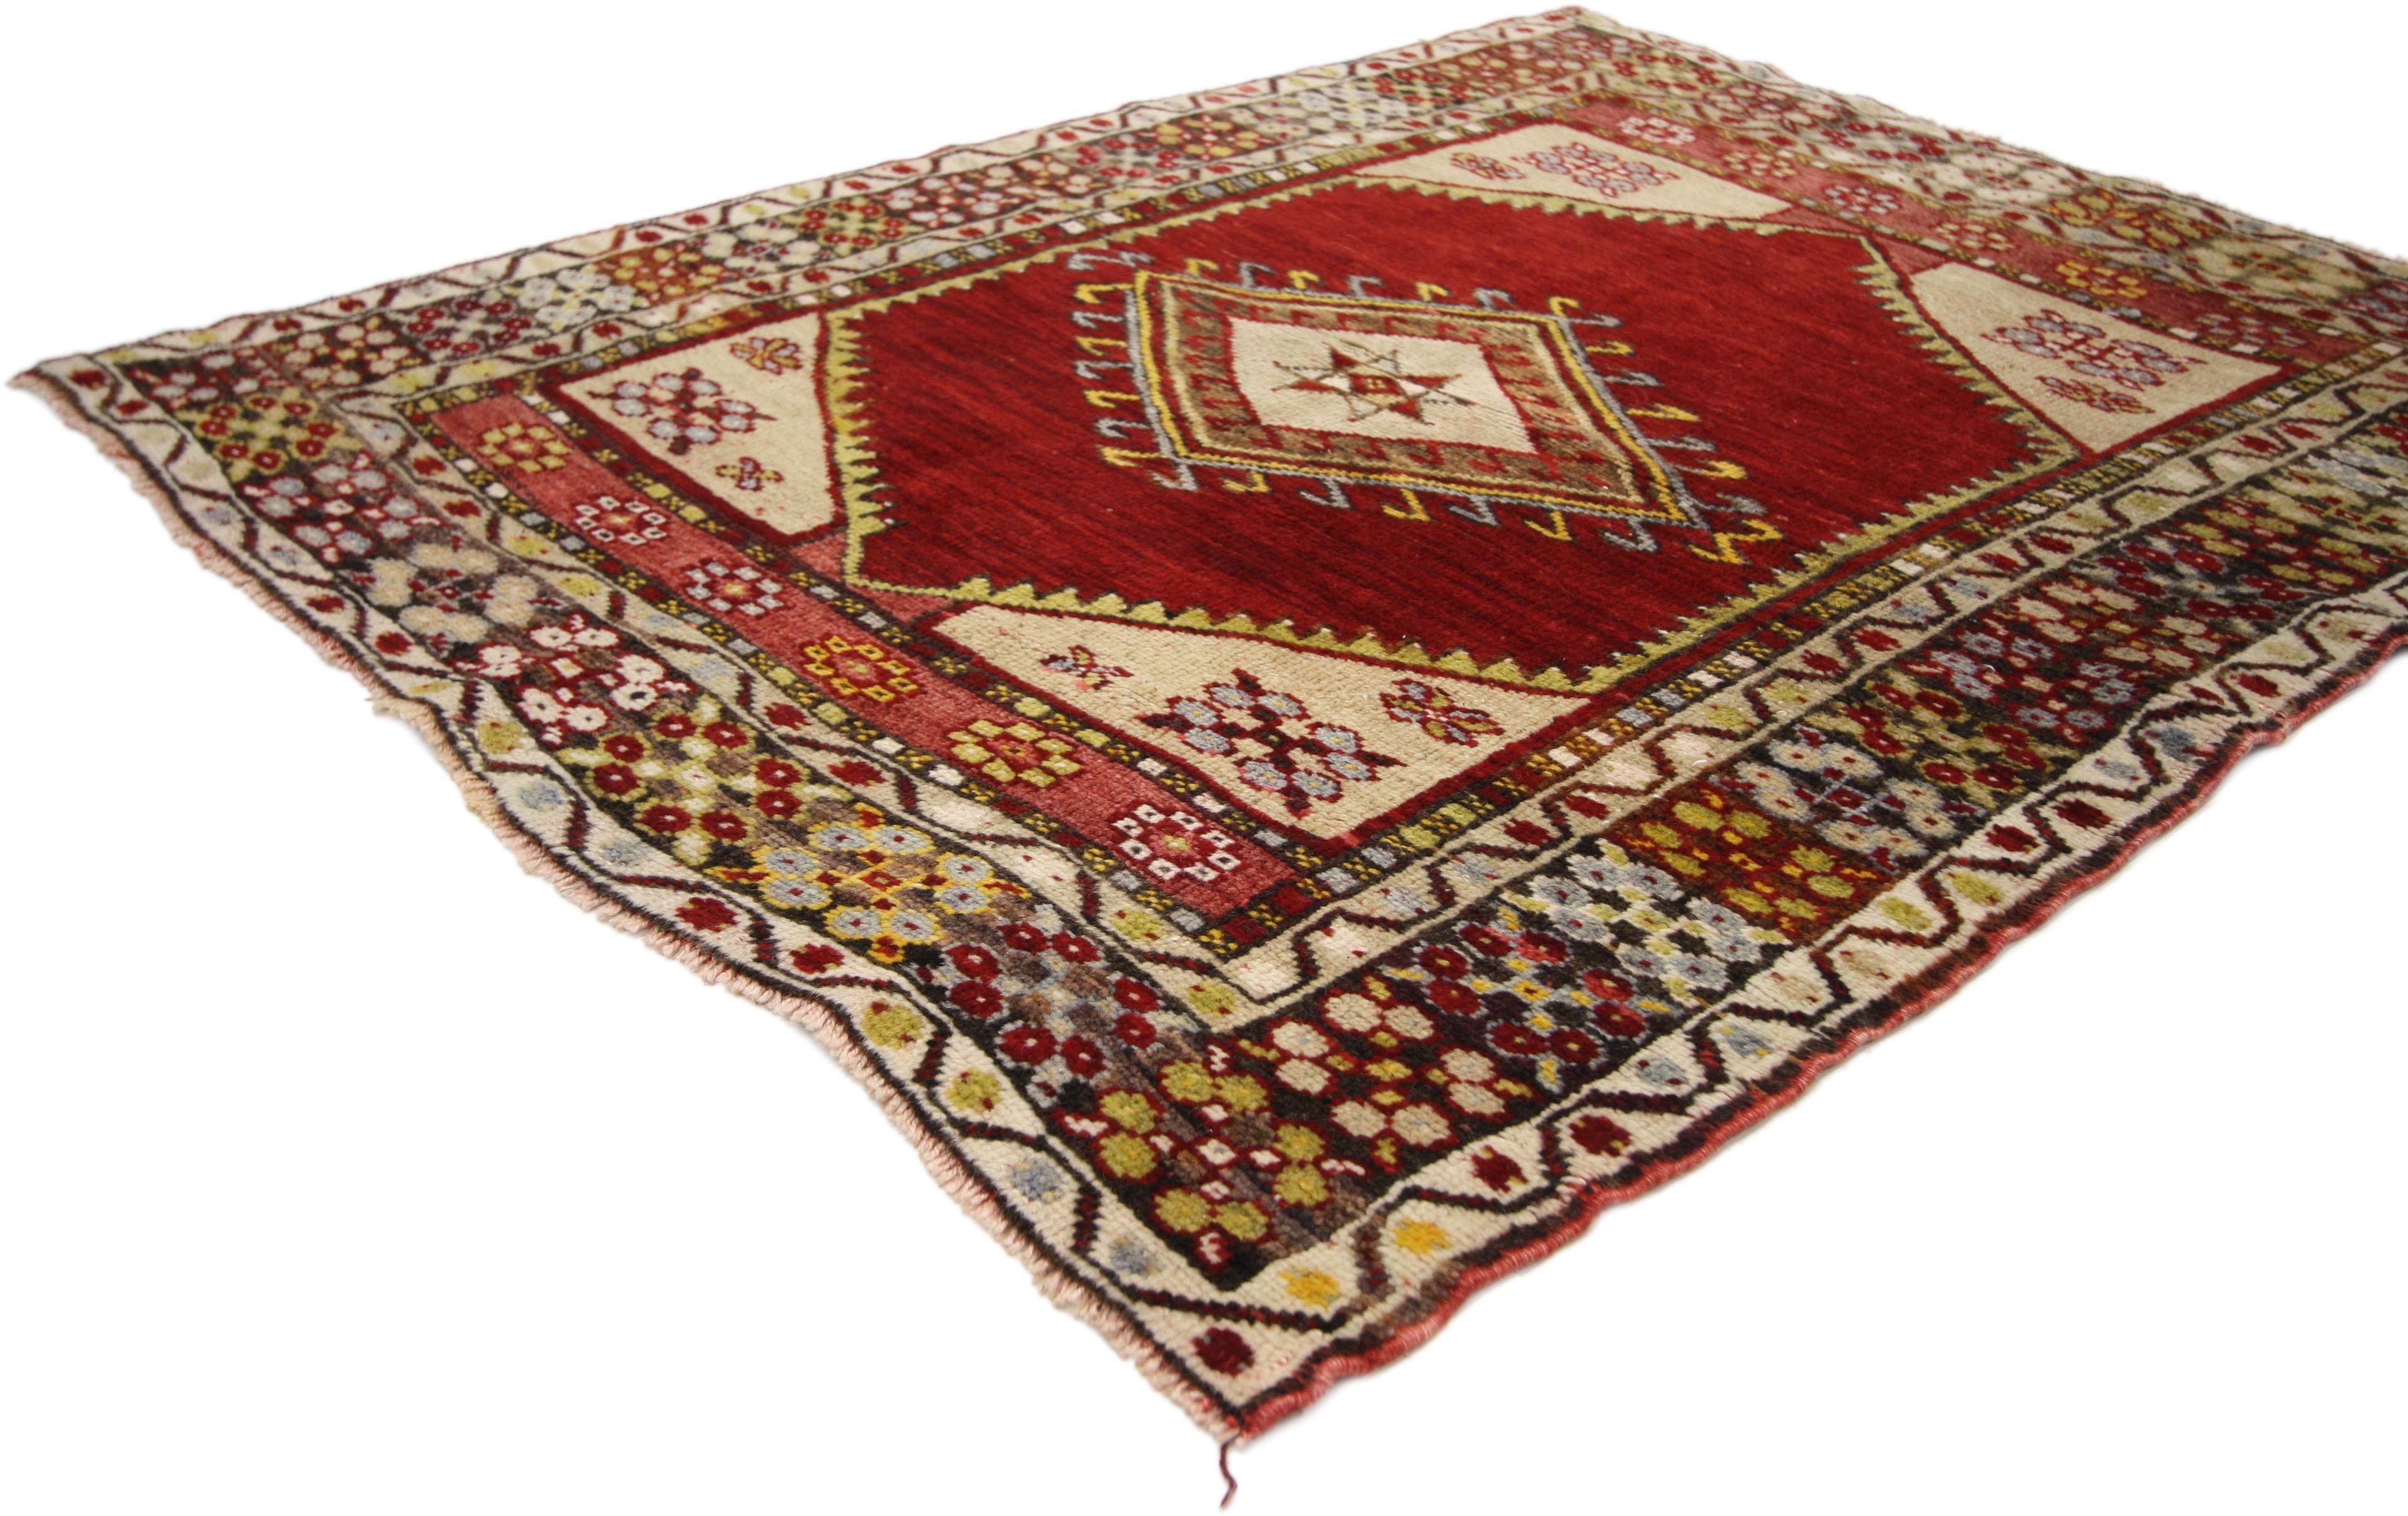 52321 Vintage Turkish Oushak Rug, 03'05 x 04'00.
Emanating modern style with incredible detail and texture, this vintage Turkish Oushak rug is a captivating vision of woven beauty. Immersed in Anatolian history and a refined color palette, this